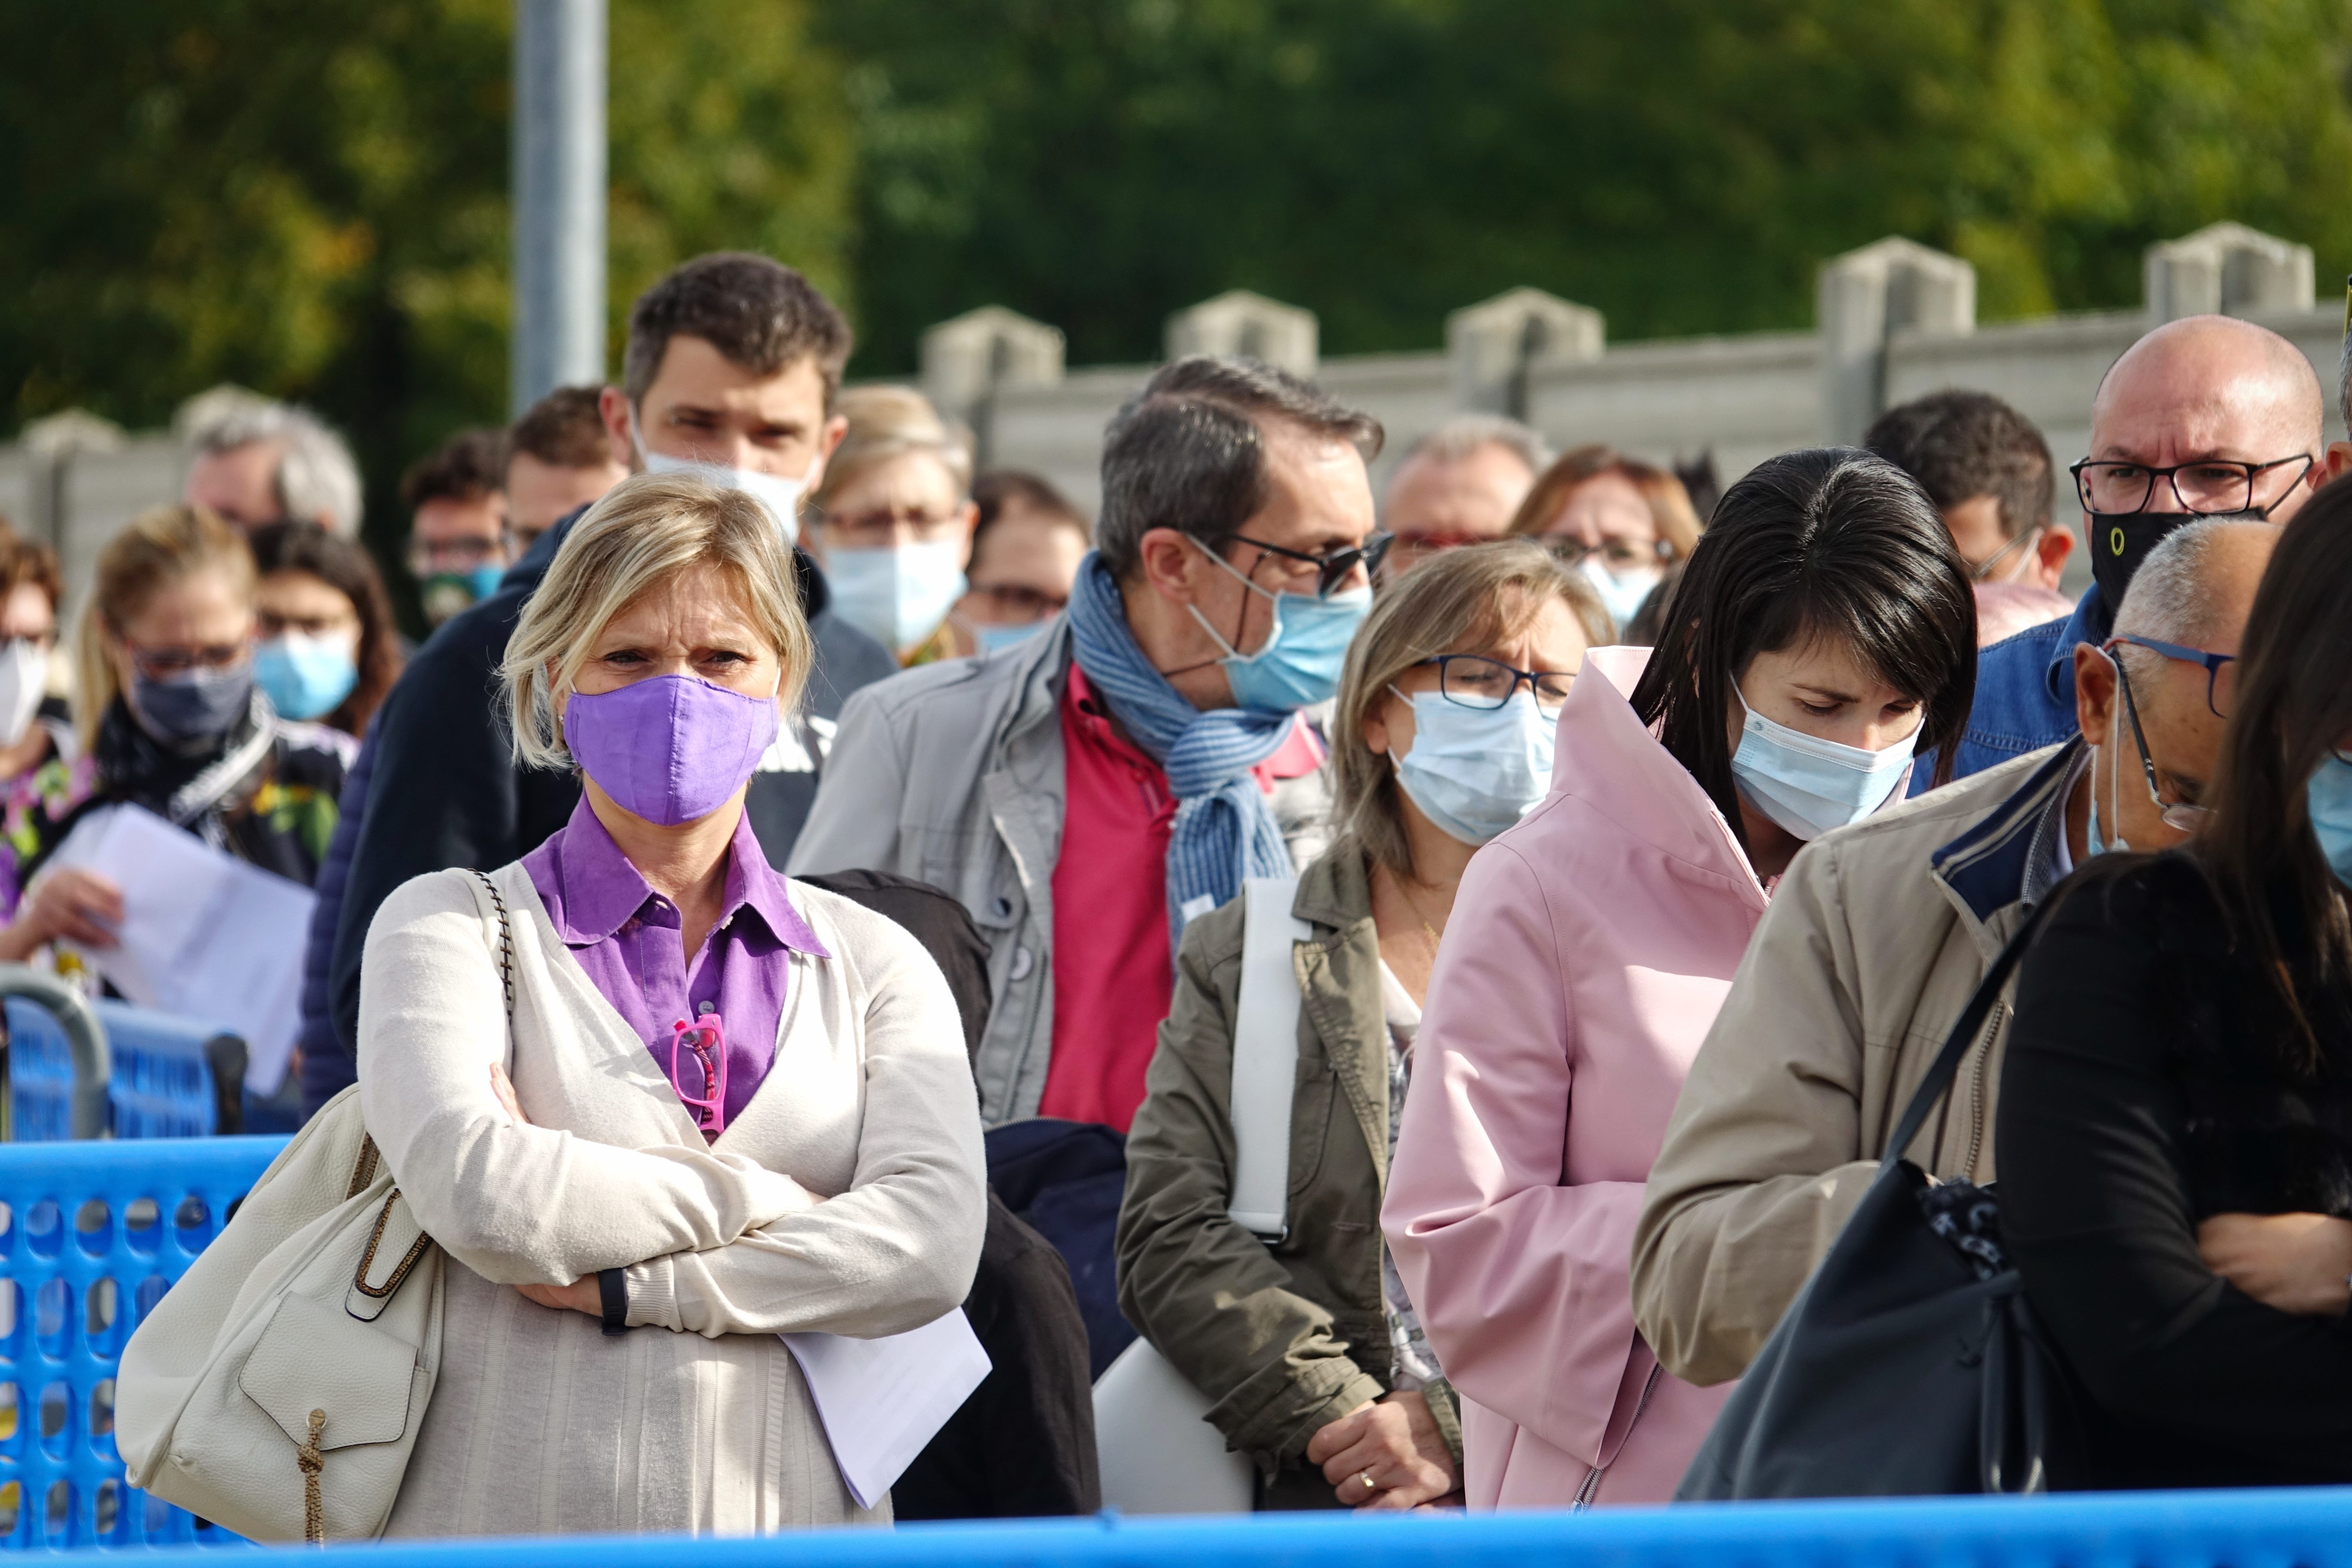 crowd standing in line with masks on